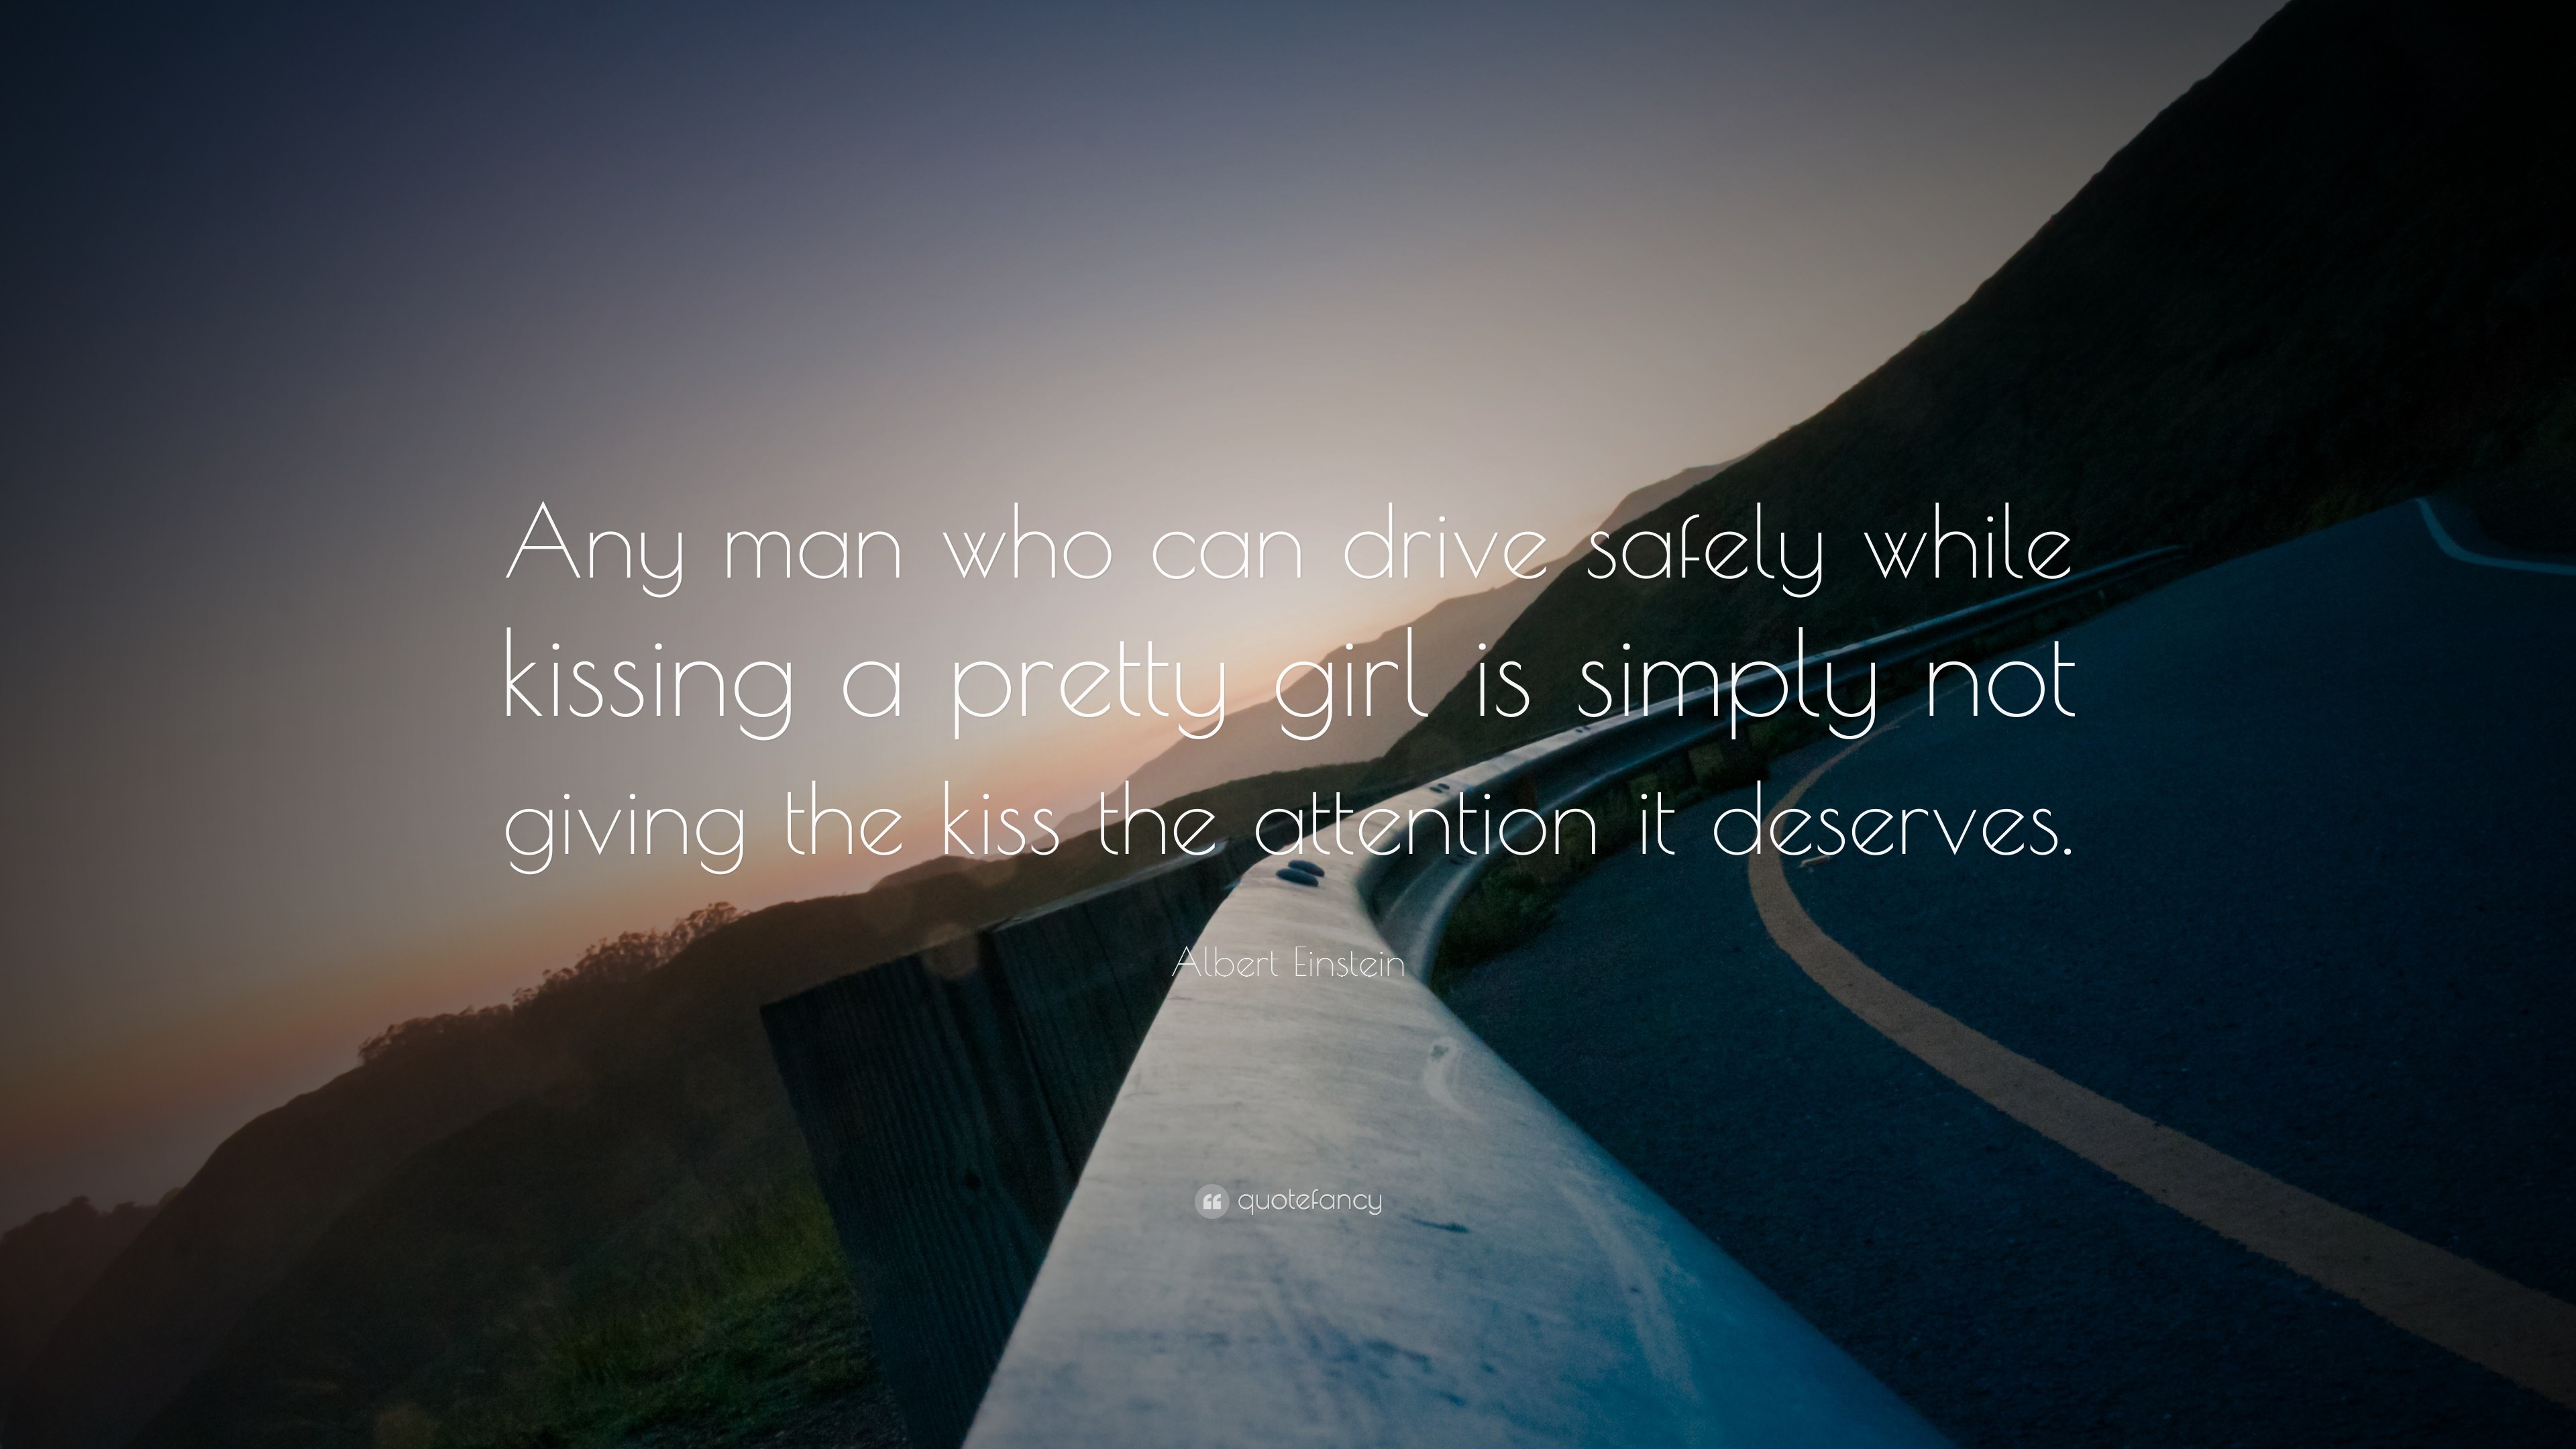 Albert Einstein Quote: “Any man who can drive safely while kissing a pretty  girl